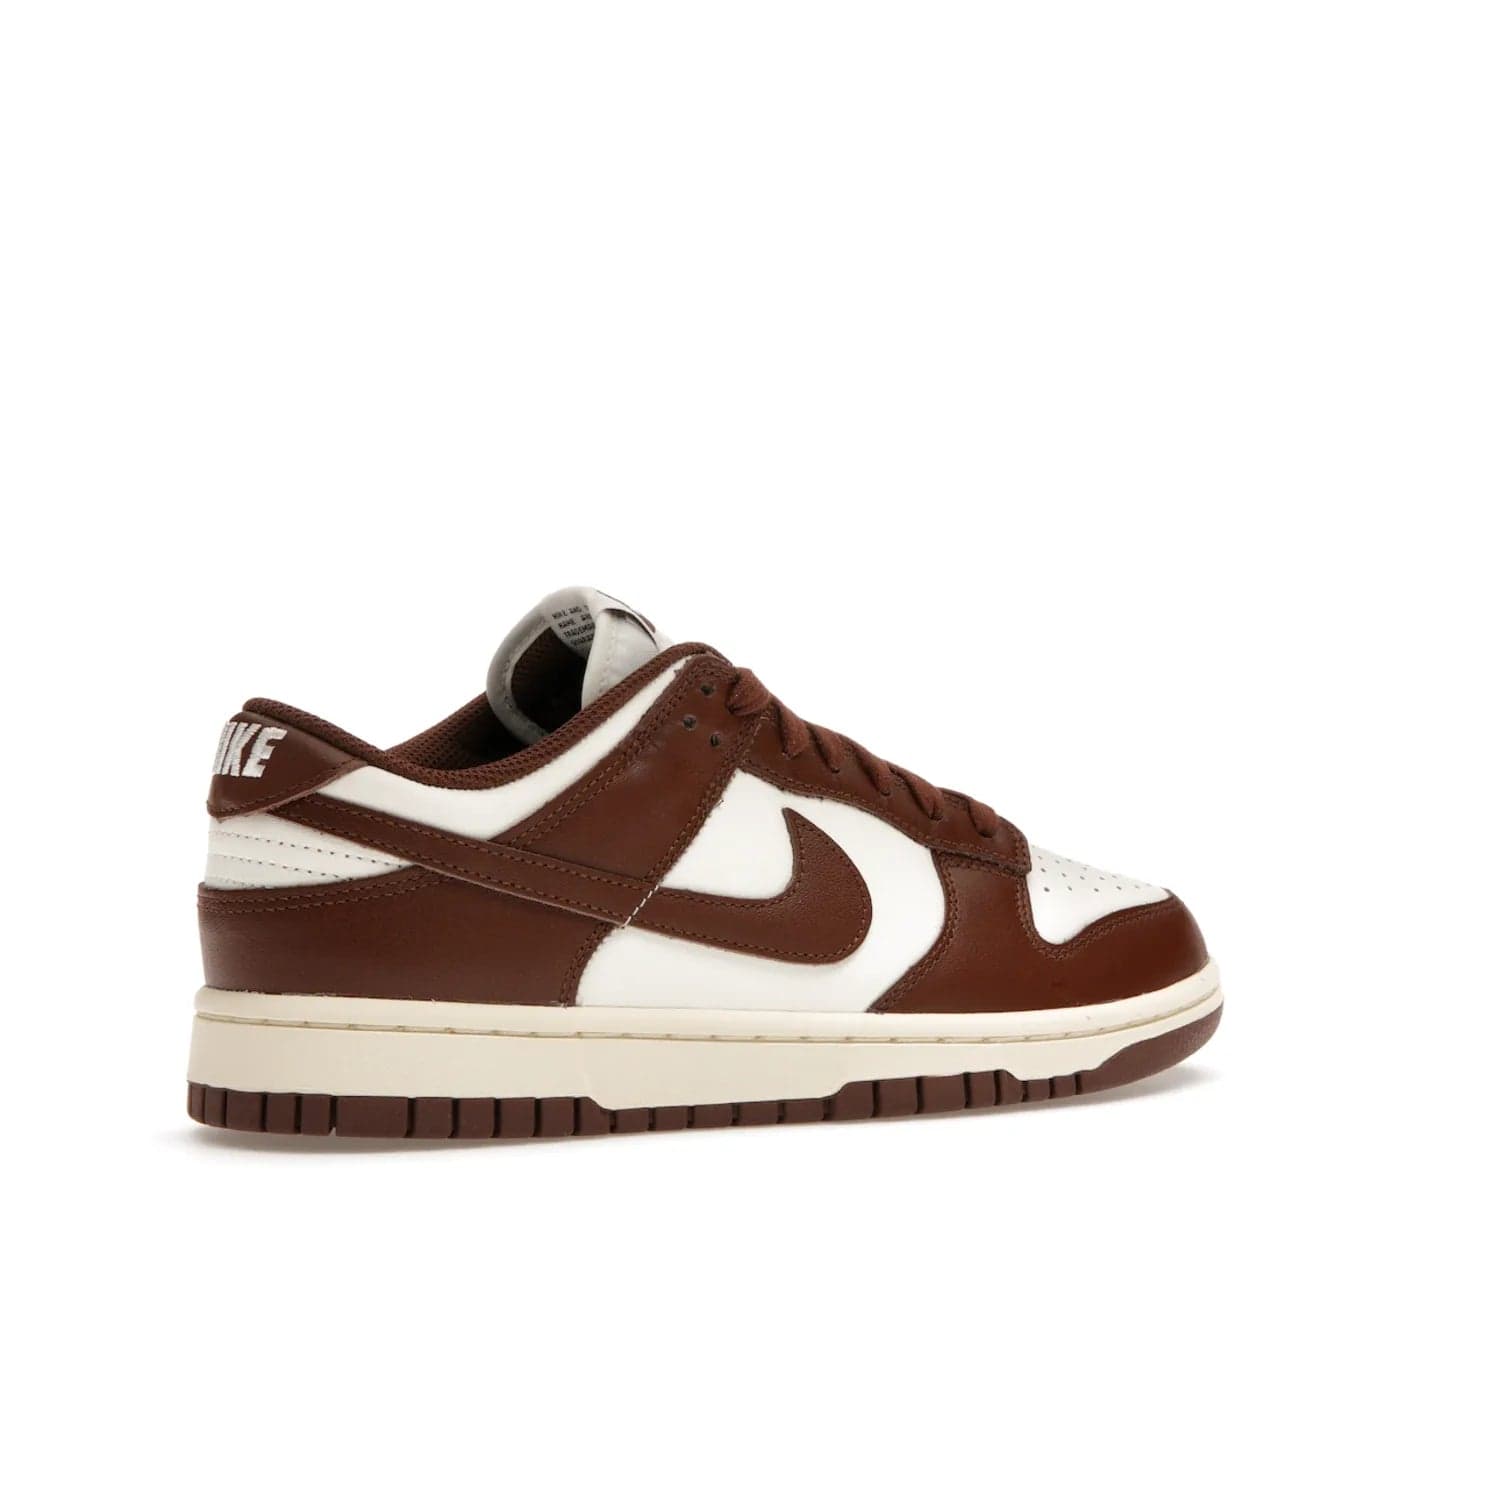 Nike Dunk Low Cacao Wow (Women's) - Image 34 - Only at www.BallersClubKickz.com - Revised
Get the Nike Dunk Low Cacao Wow and make a statement! Plush leather and a cool Cacao Wow finish bring together a unique mix of comfort and fashion that will turn heads. Boosted with a Coconut Milk hue. Shop today.